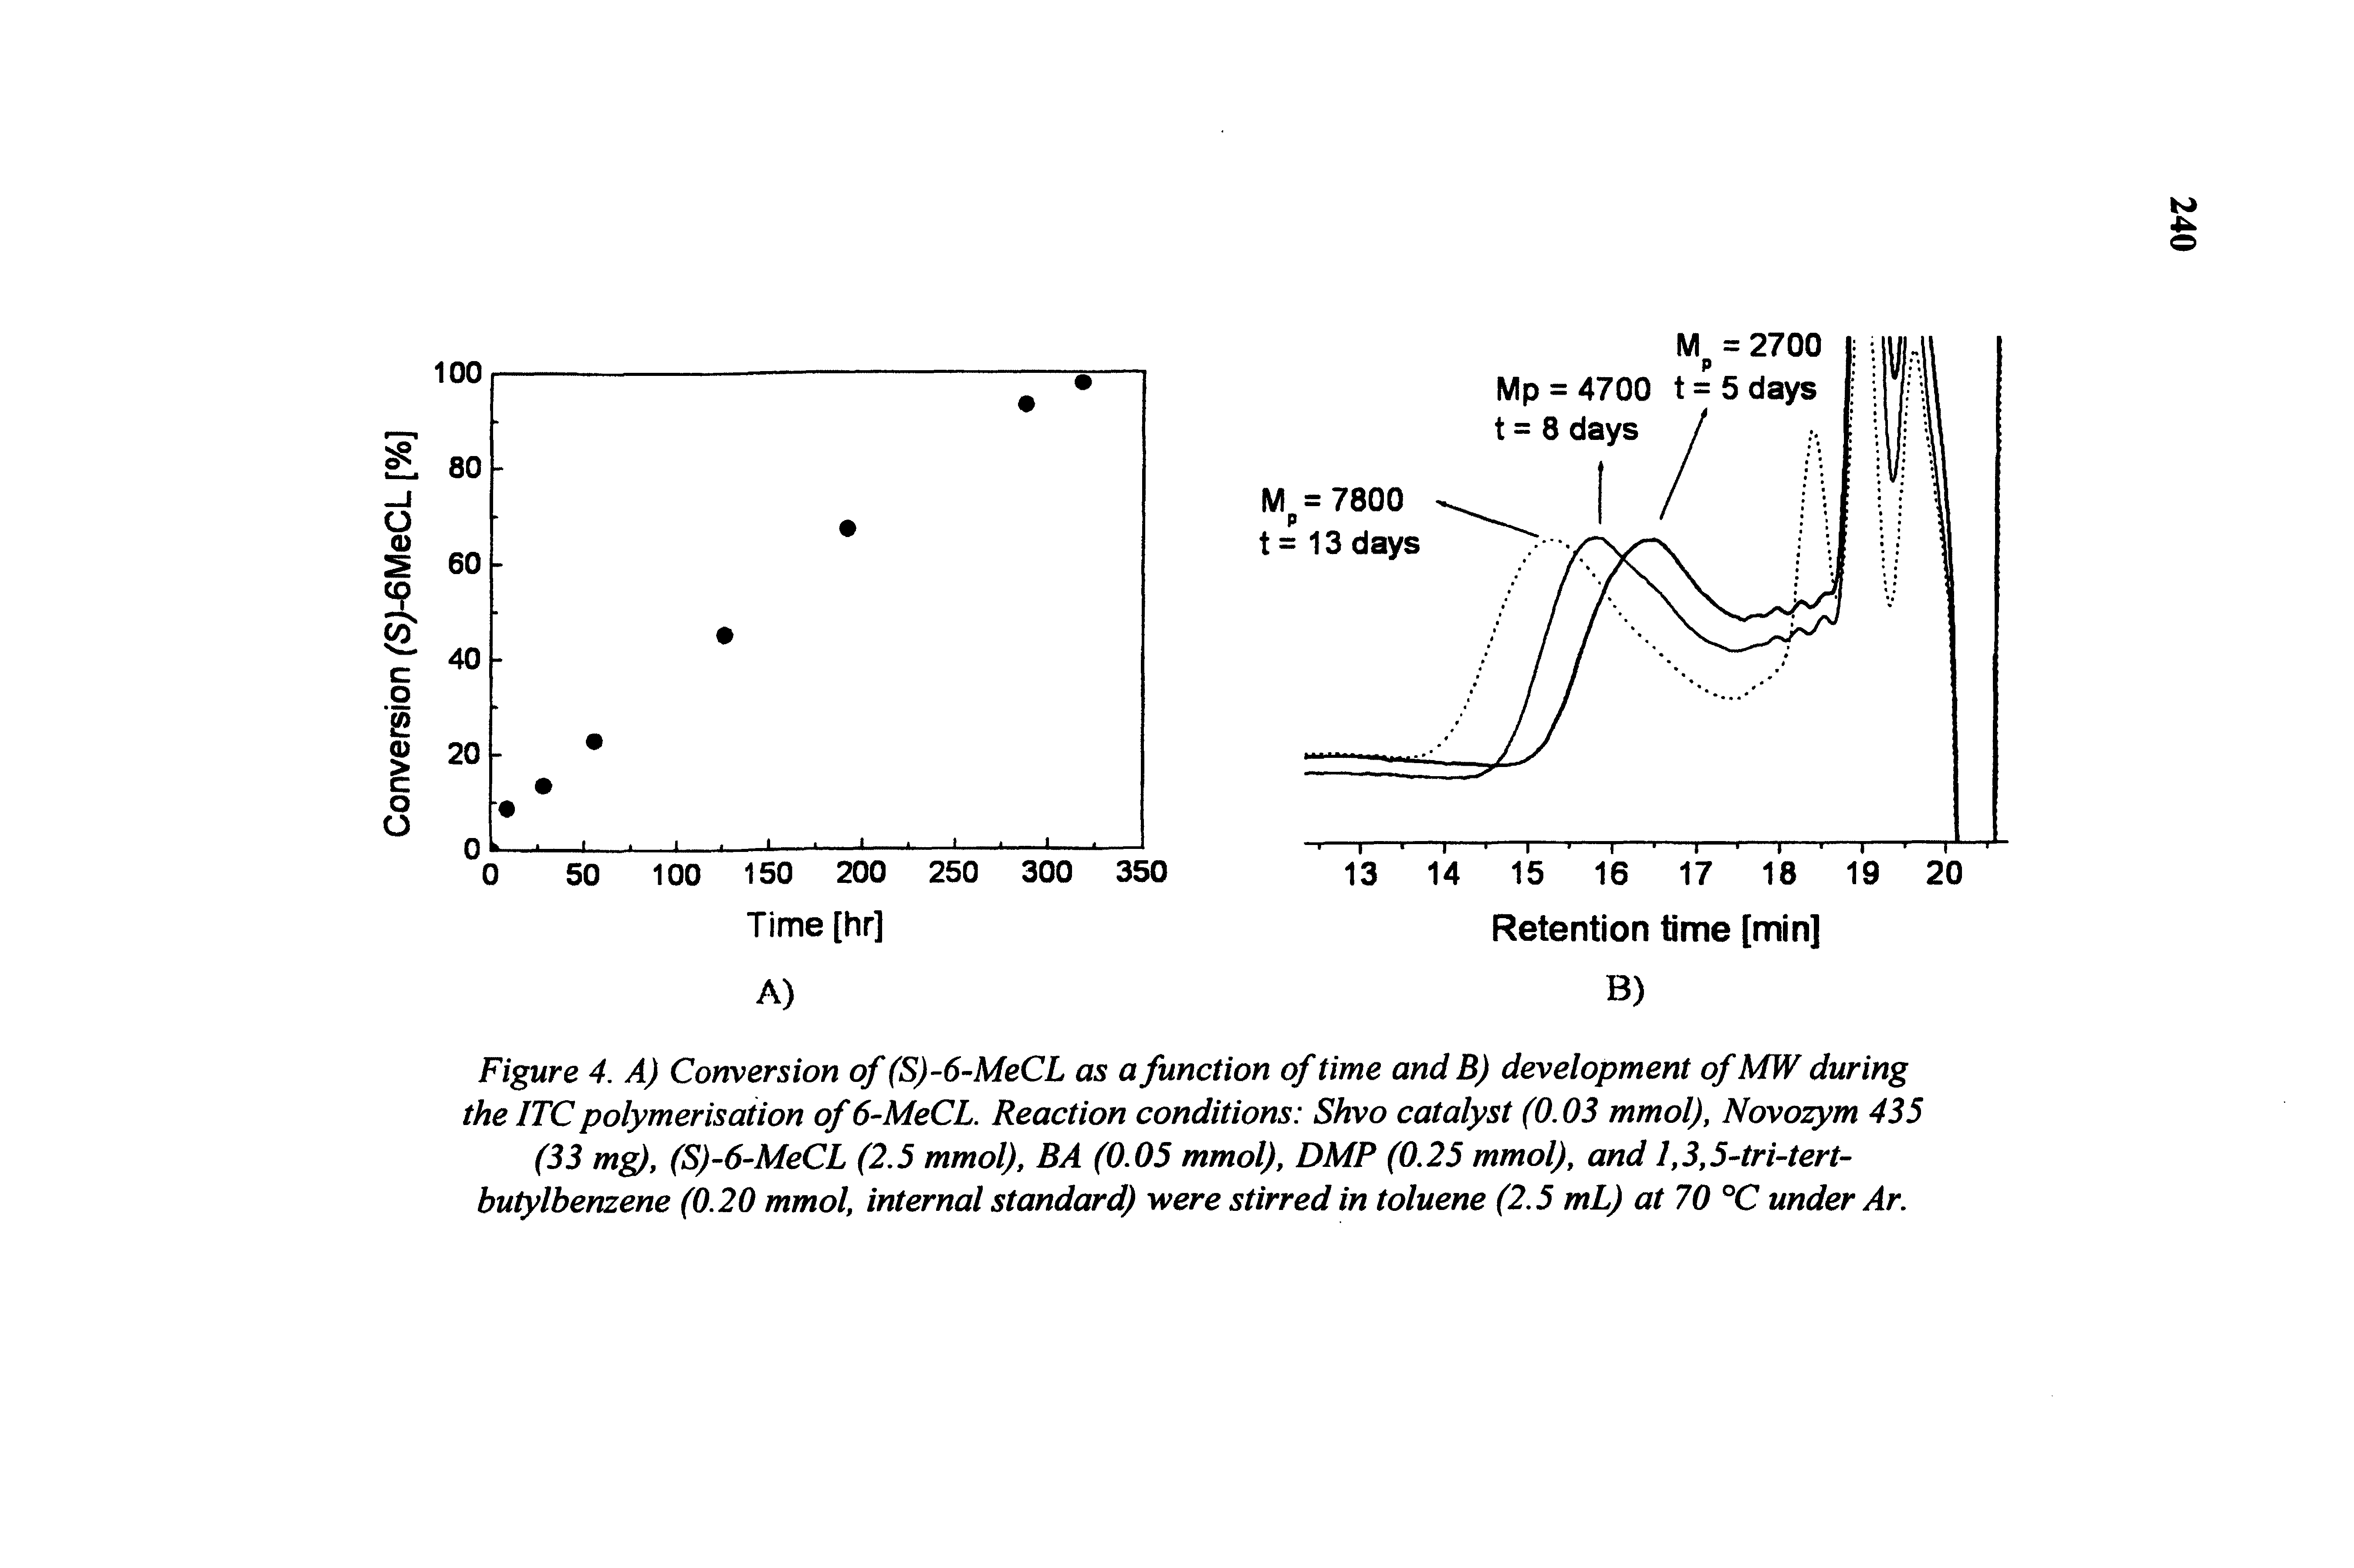 Figure 4. A) Conversion of (S)-6-MeCL as a function of time and B) development of MW during the ITC polymerisation of 6-MeCL. Reaction conditions Shvo catalyst (0.03 mmol), Novozym 435 (33 mg), (S)-6-MeCL (2.5 mmol), BA (0.05 mmol), DMP (0.25 mmol), and 1,3,5-tri tert-butylbenzene (0.20 mmol, internal standard) were stirred in toluene (2.5 mL) at 70 °C under Ar.